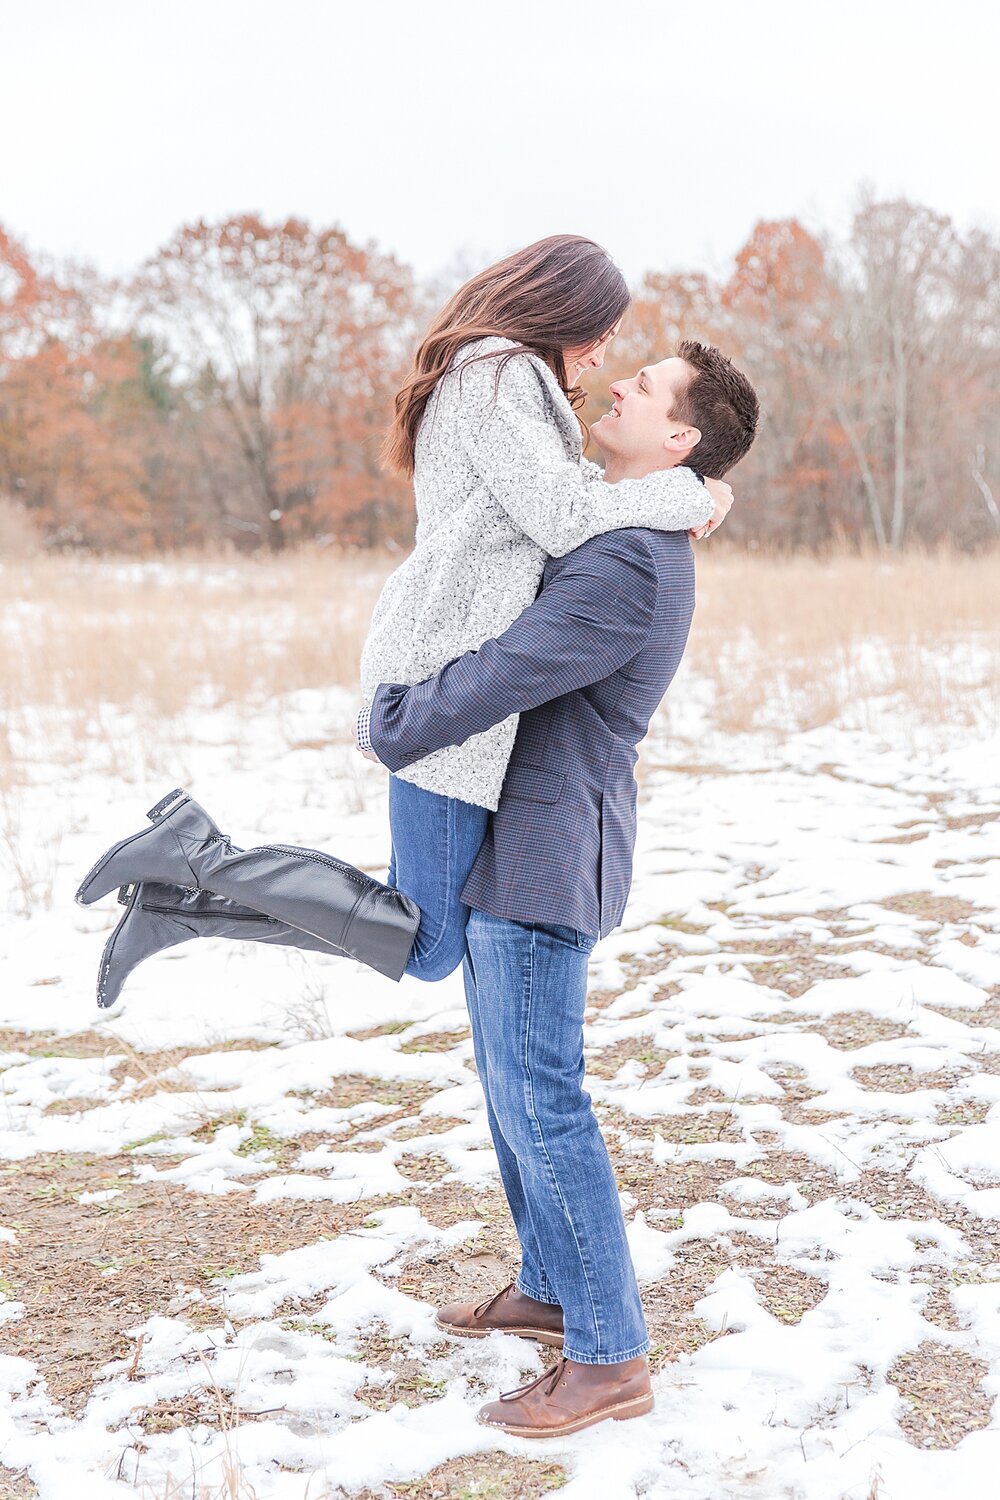 detroit-wedding-photographer-winter-engagement-photos-at-stony-creek-metropark-in-shelby-twp-mi-by-courtney-carolyn-photography_0005.jpg